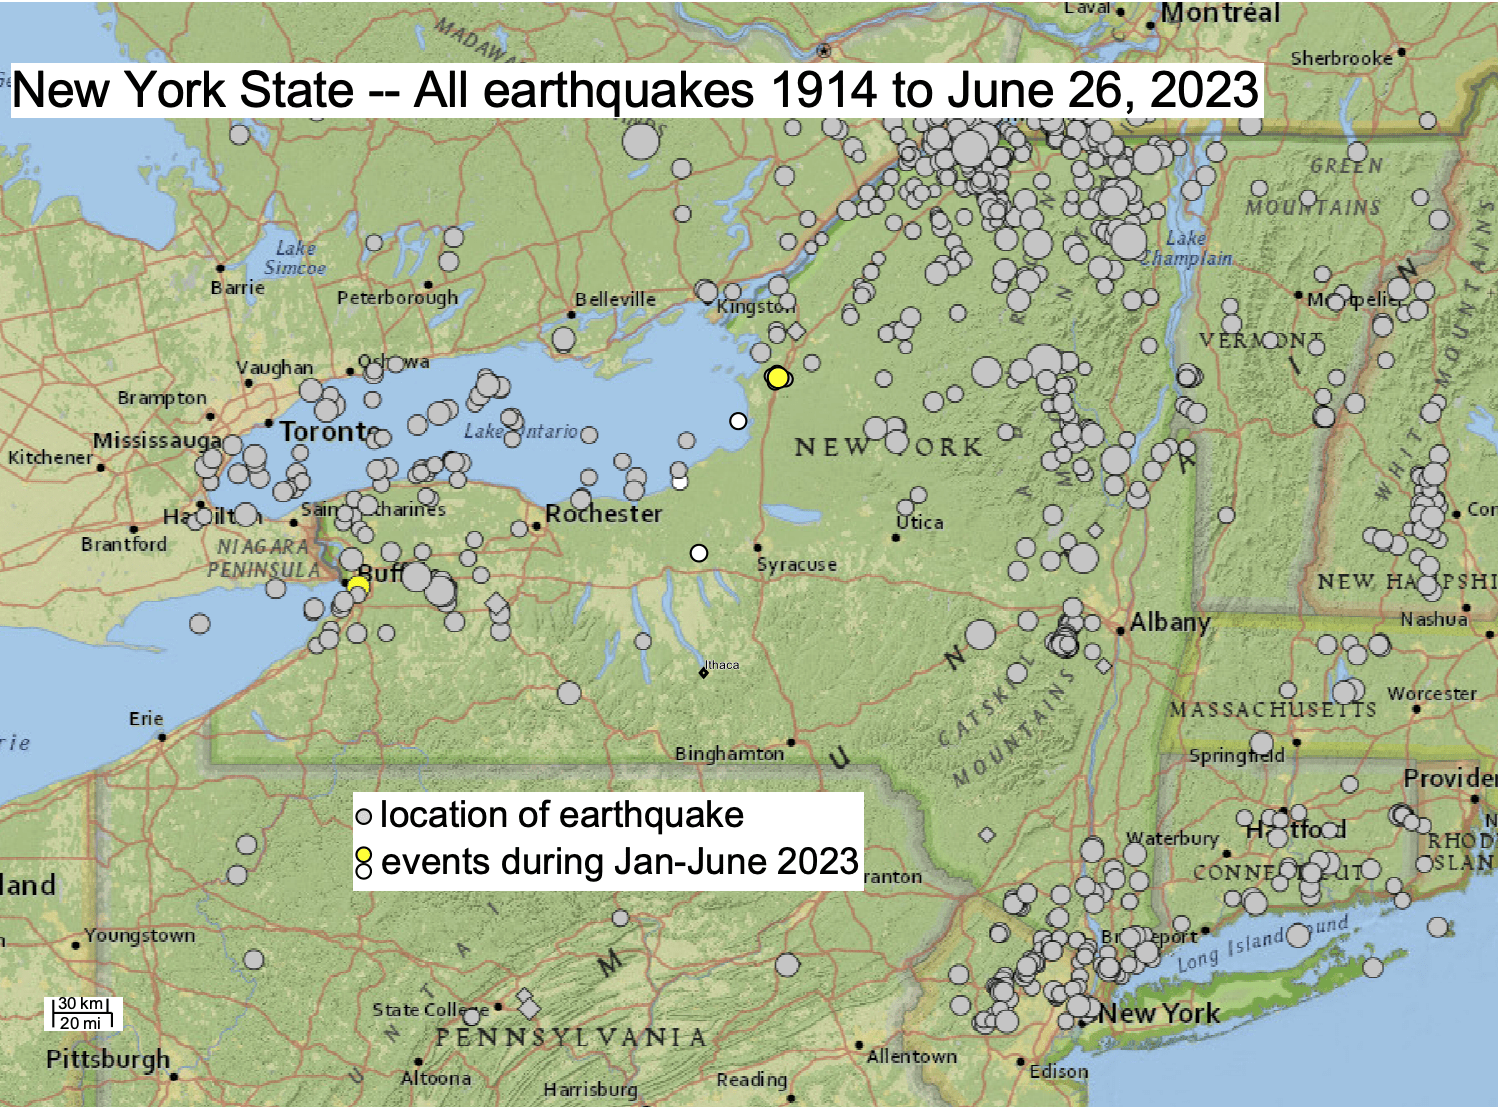 map of northeastern U.S. shows positions of all earthquakes since 1914 as points on the map. These are data from the U.S. Geological Survey